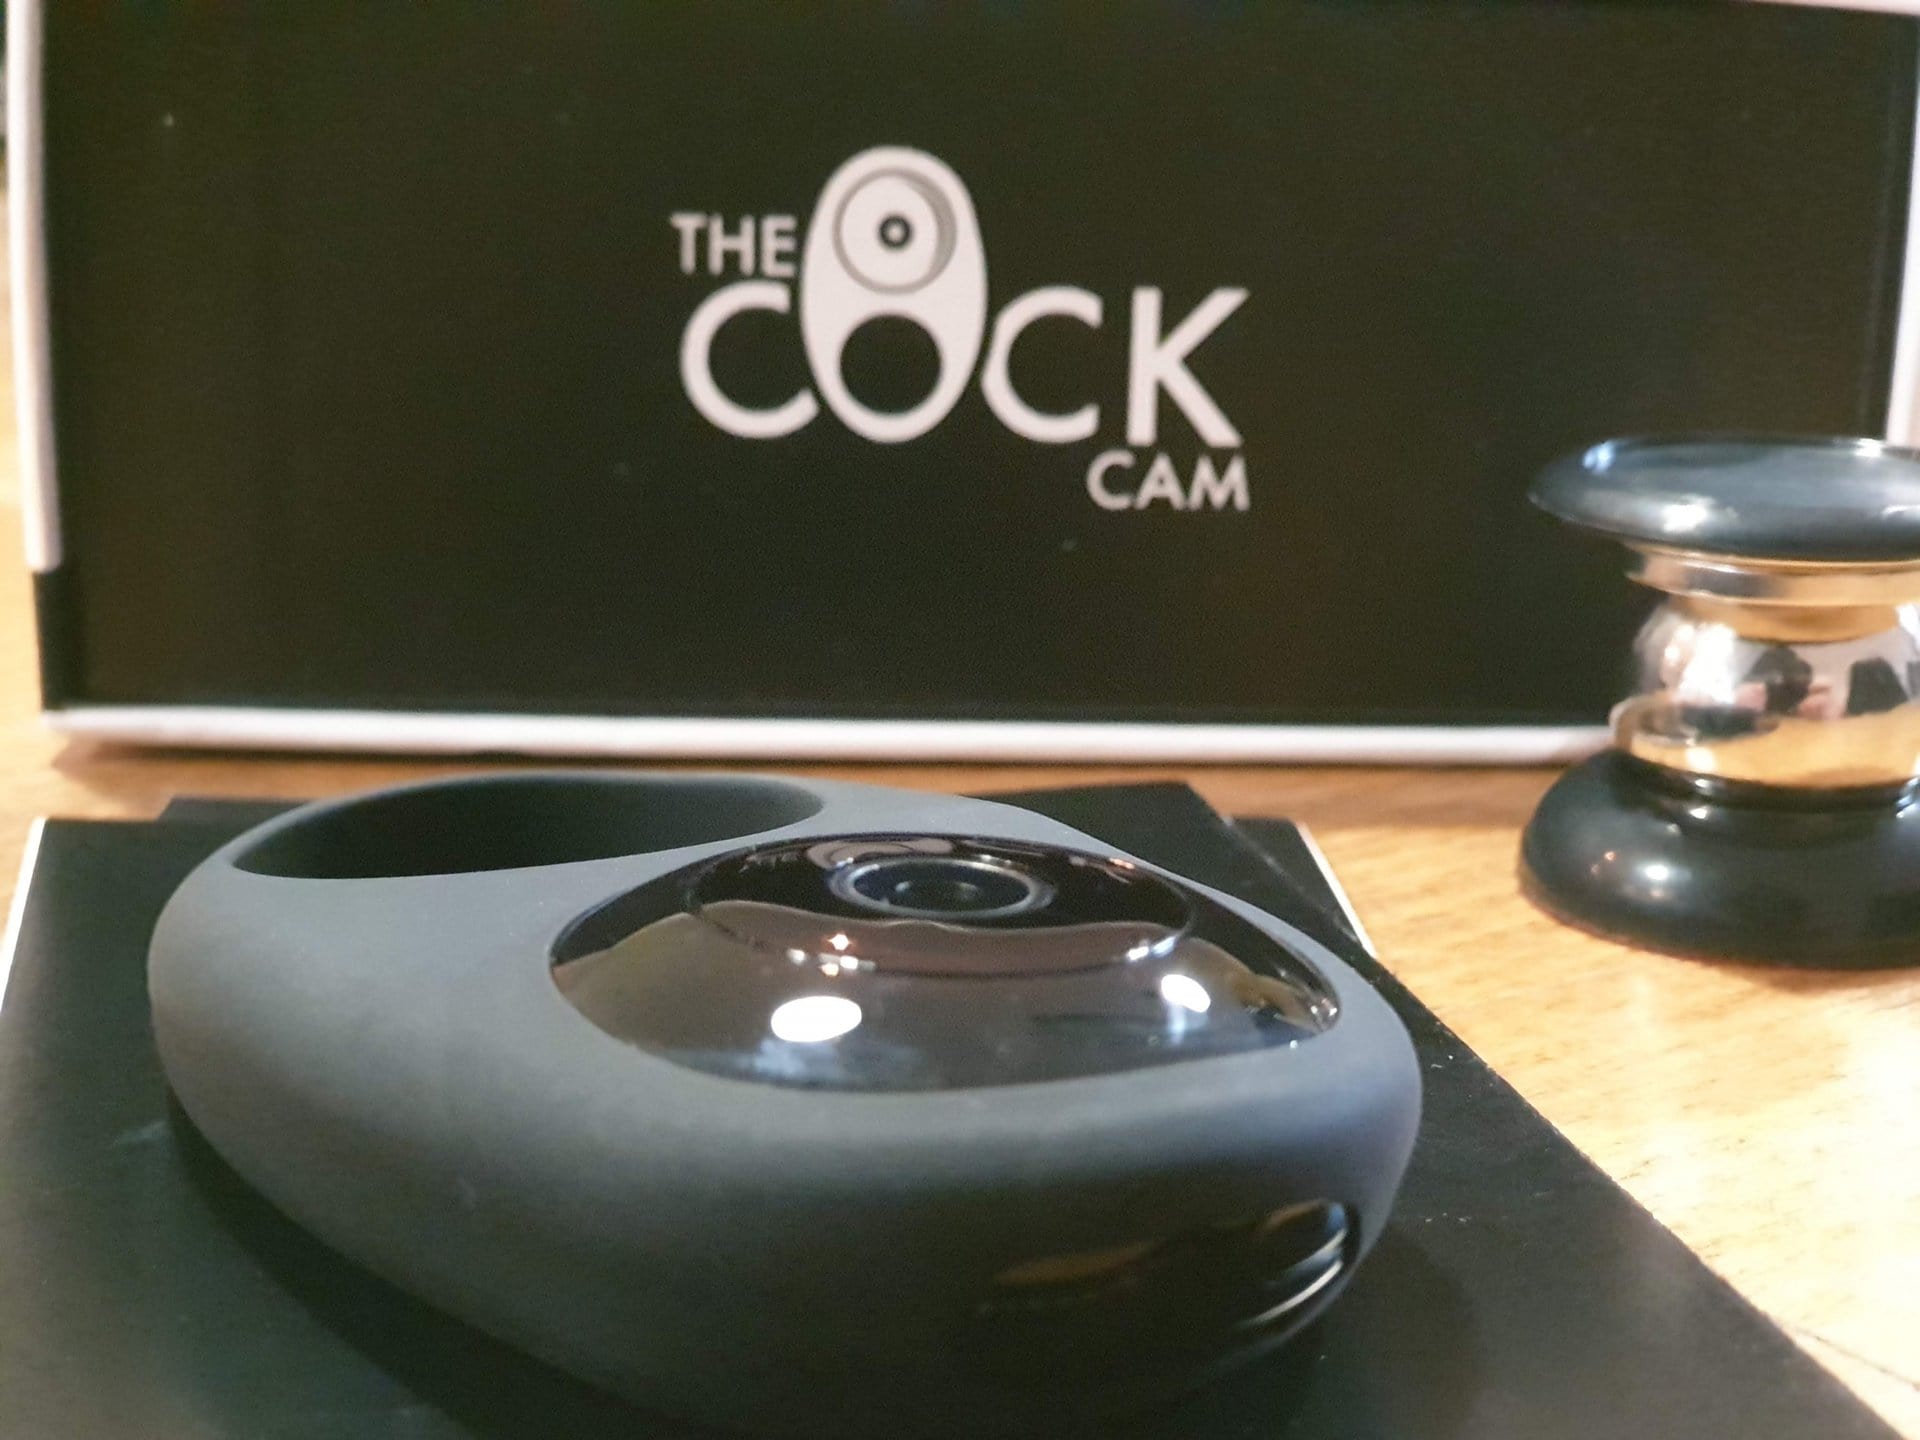 The CockCam review showcases the device placed on a table alongside a box.